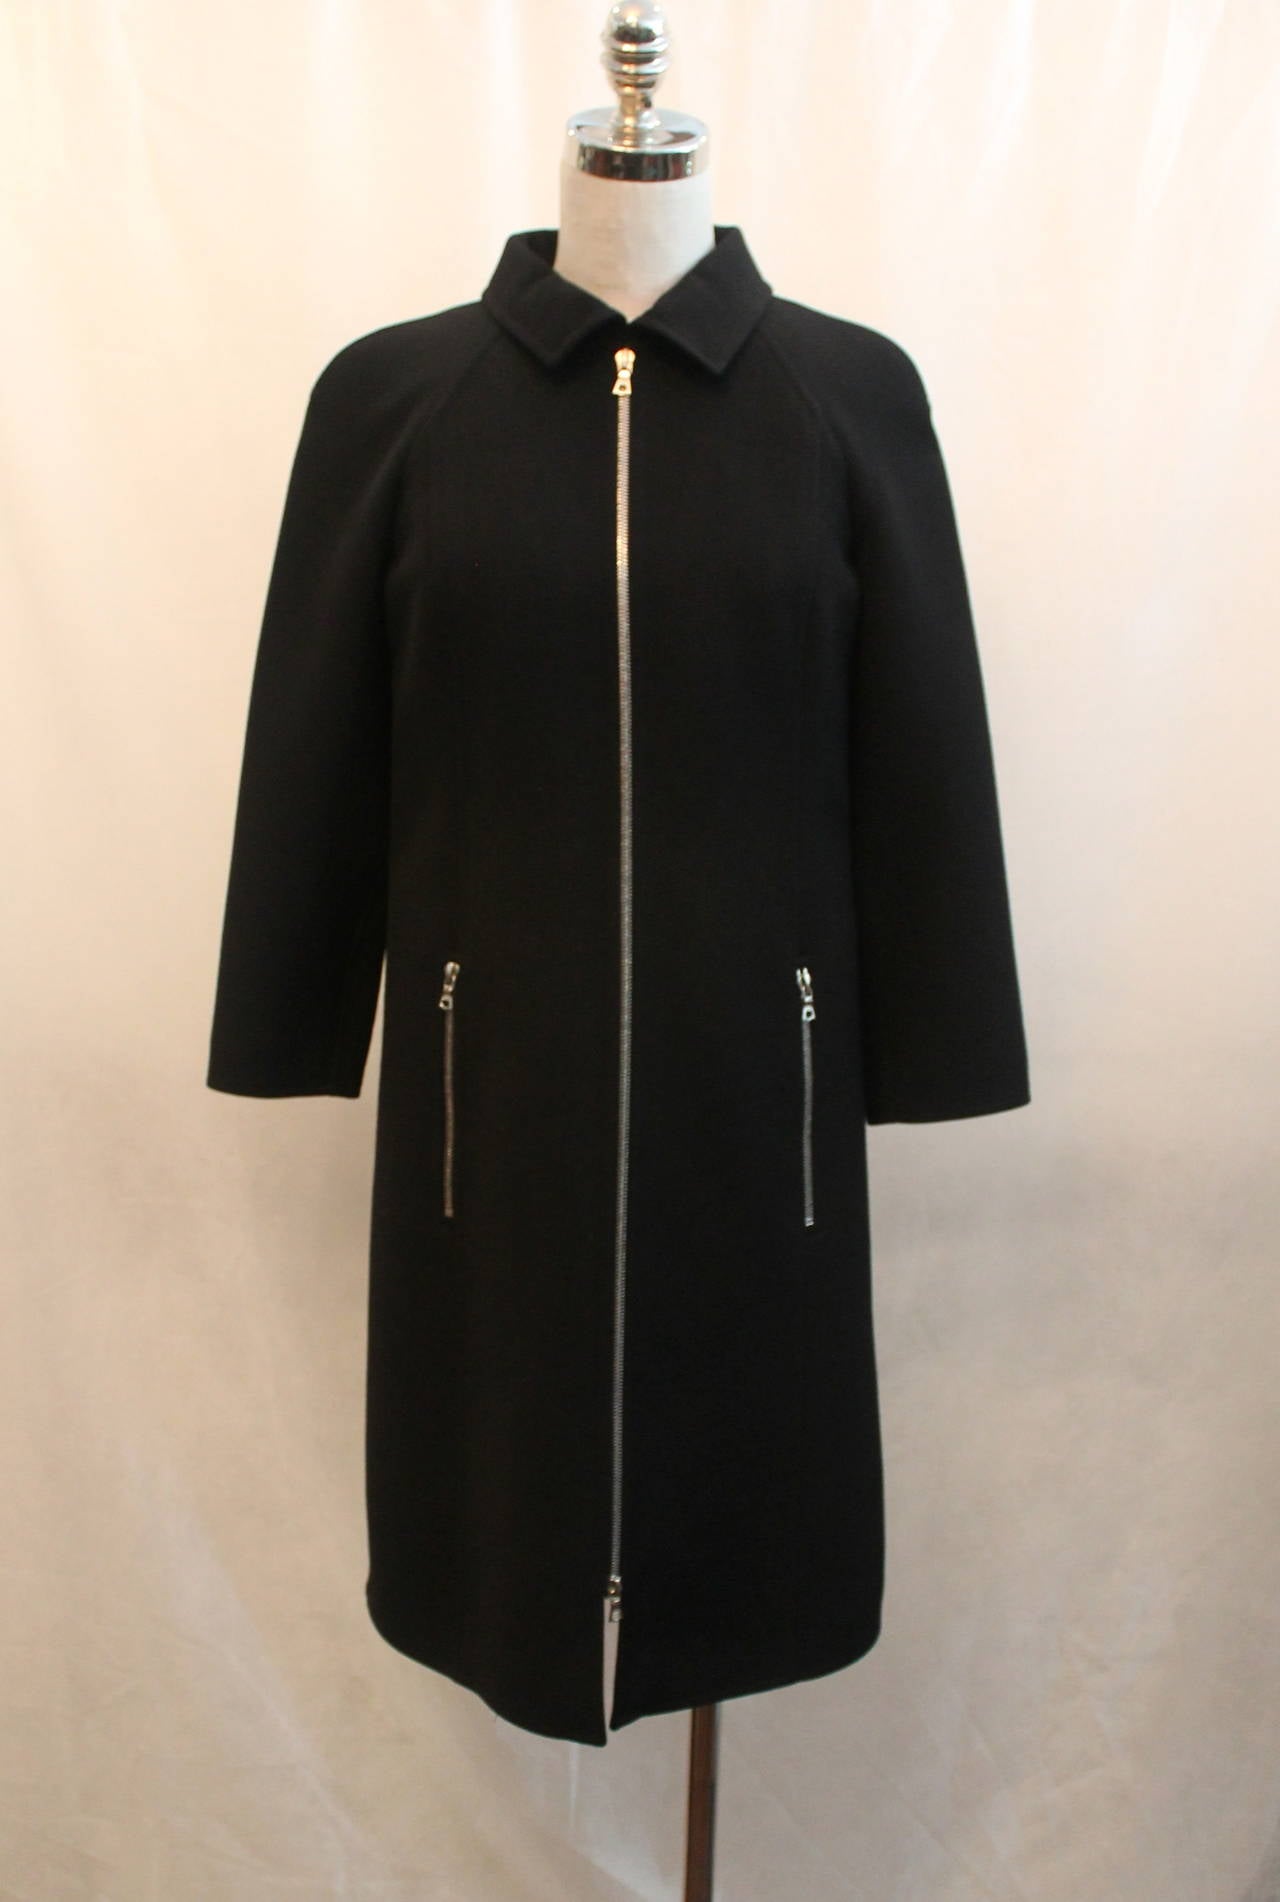 Courreges Black Wool Coat with Front Zip - 38. This coat is in excellent condition and has a silver zipper down the middle & two pockets with silver zippers in the front. 

Measurements:
Bust- 36